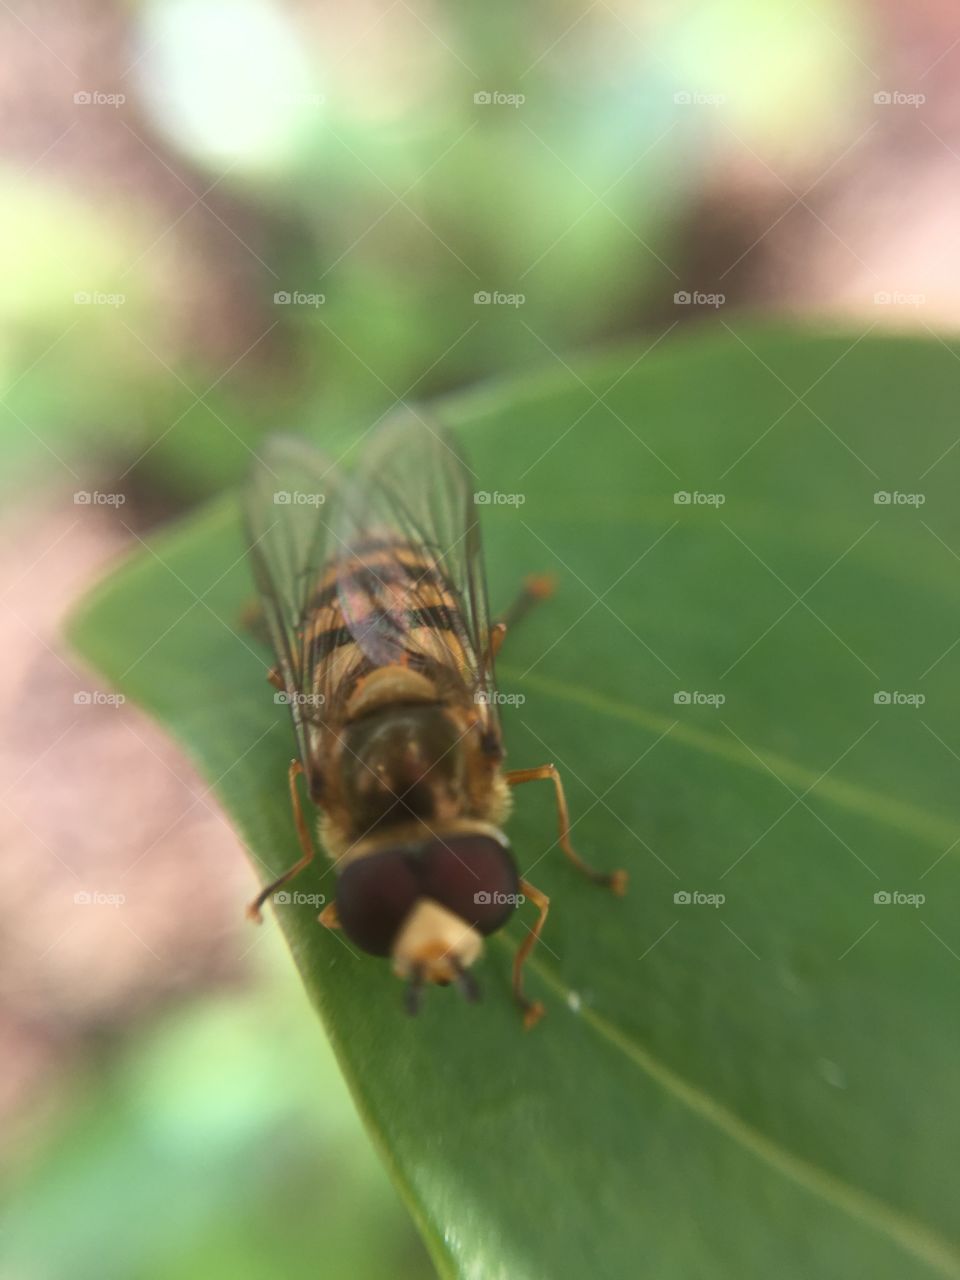 Unfocused hover fly 2